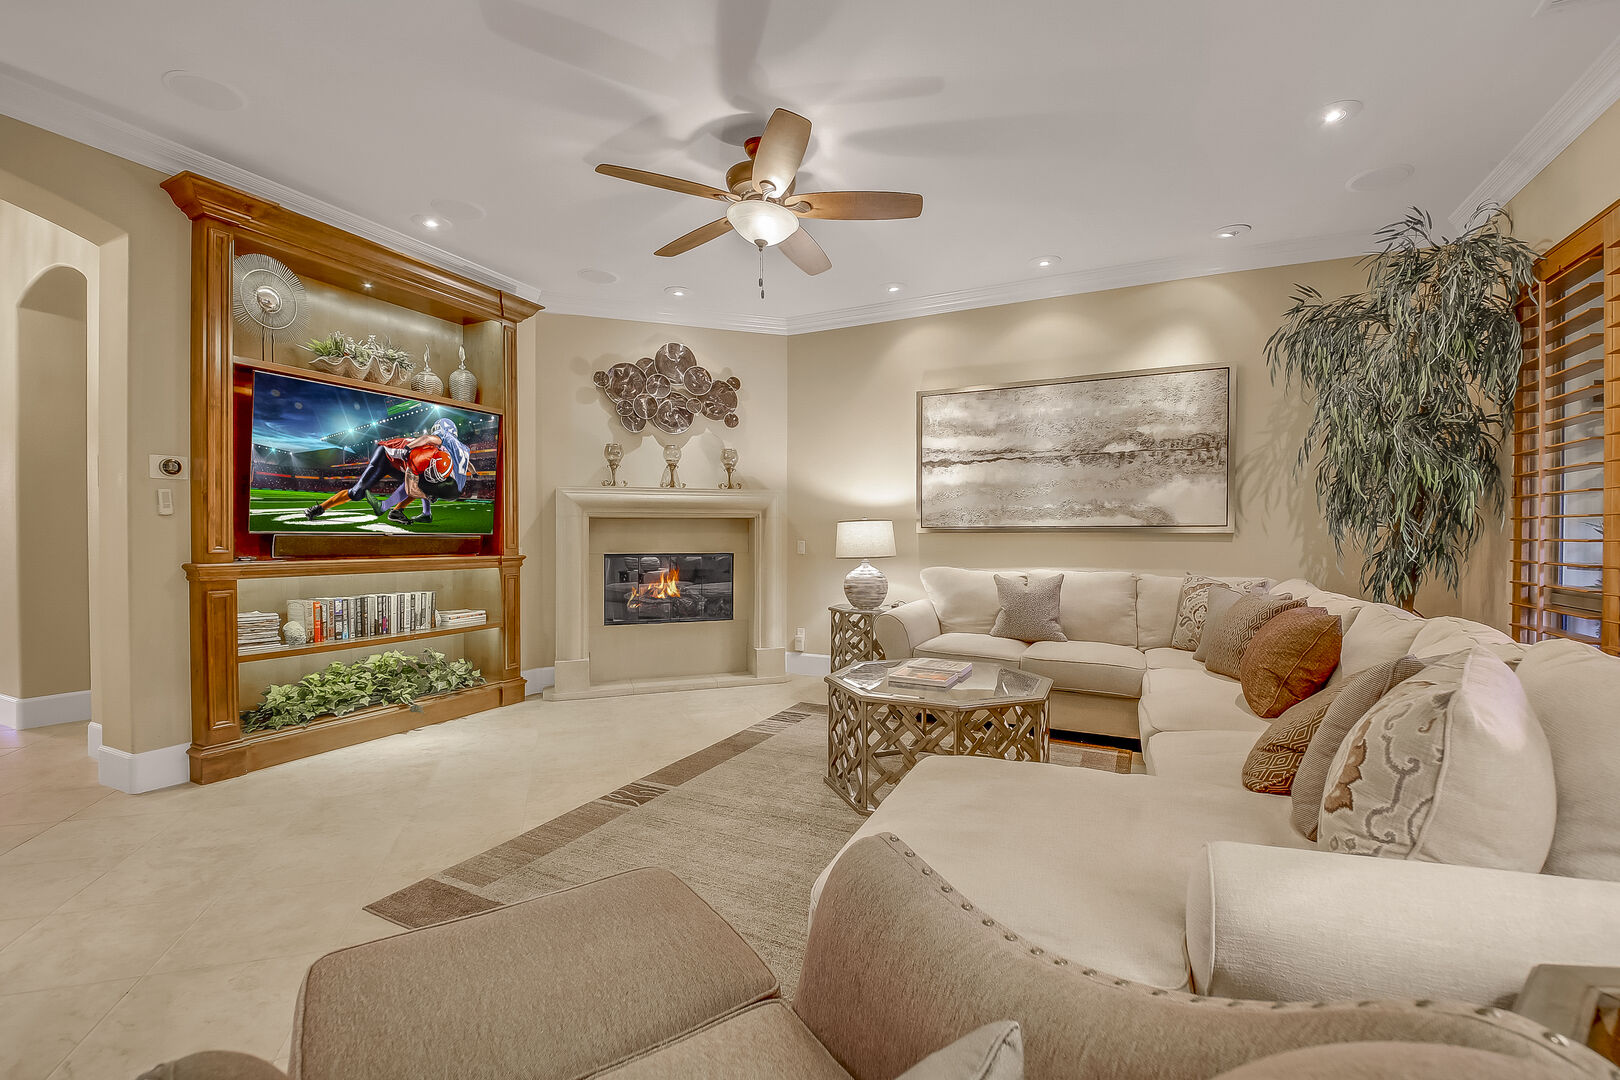 Stay cool under the remote-controlled ceiling fan.